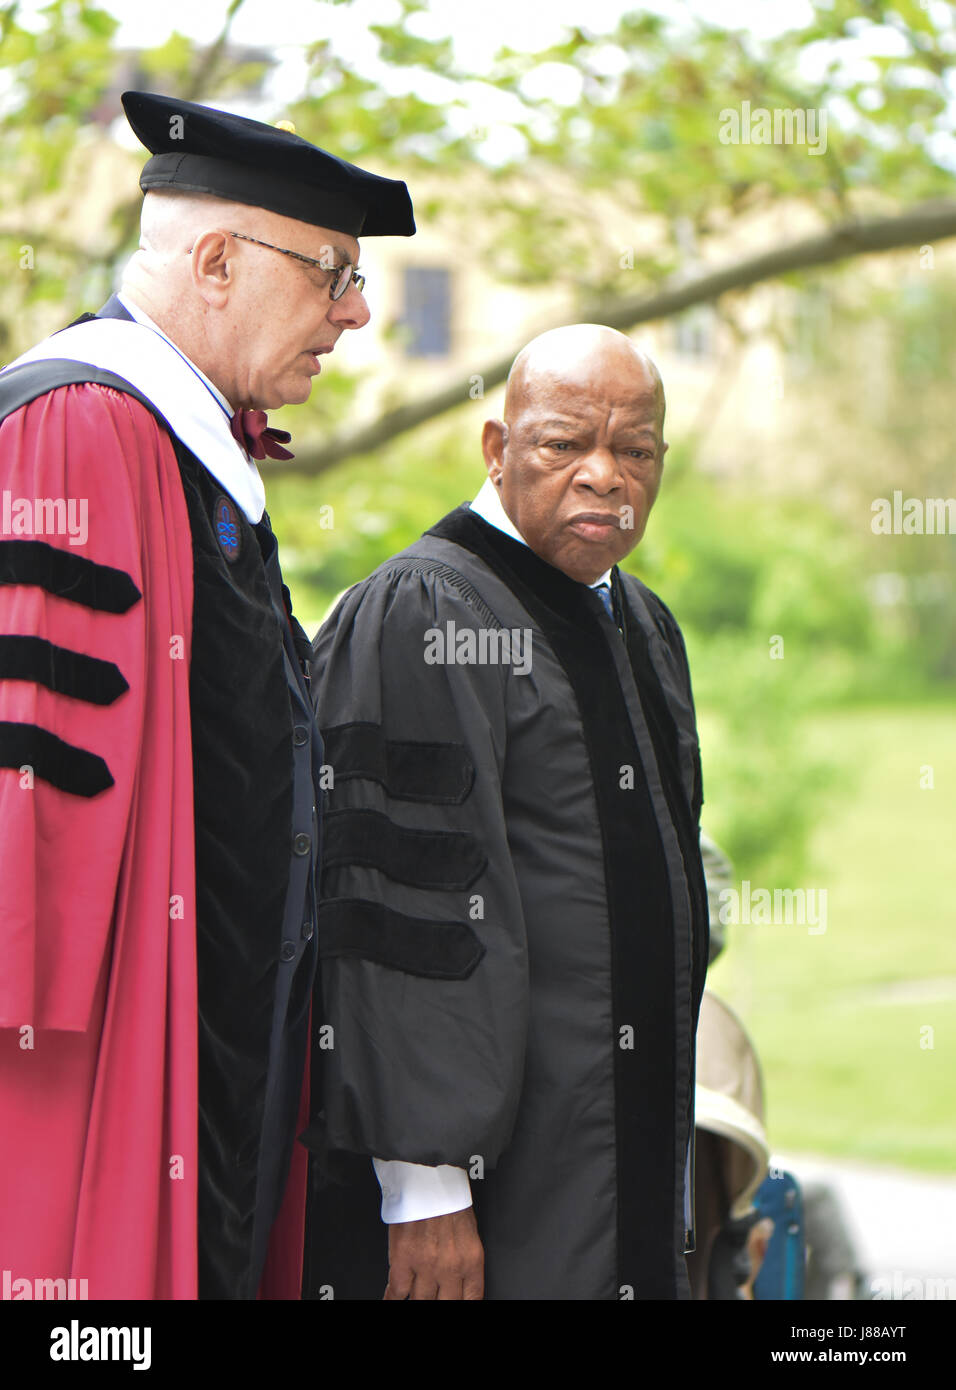 Georgia Congressman, John Lewis, a leading civil rights leader walks at Bard College commencement on May 27, 2017. Stock Photo